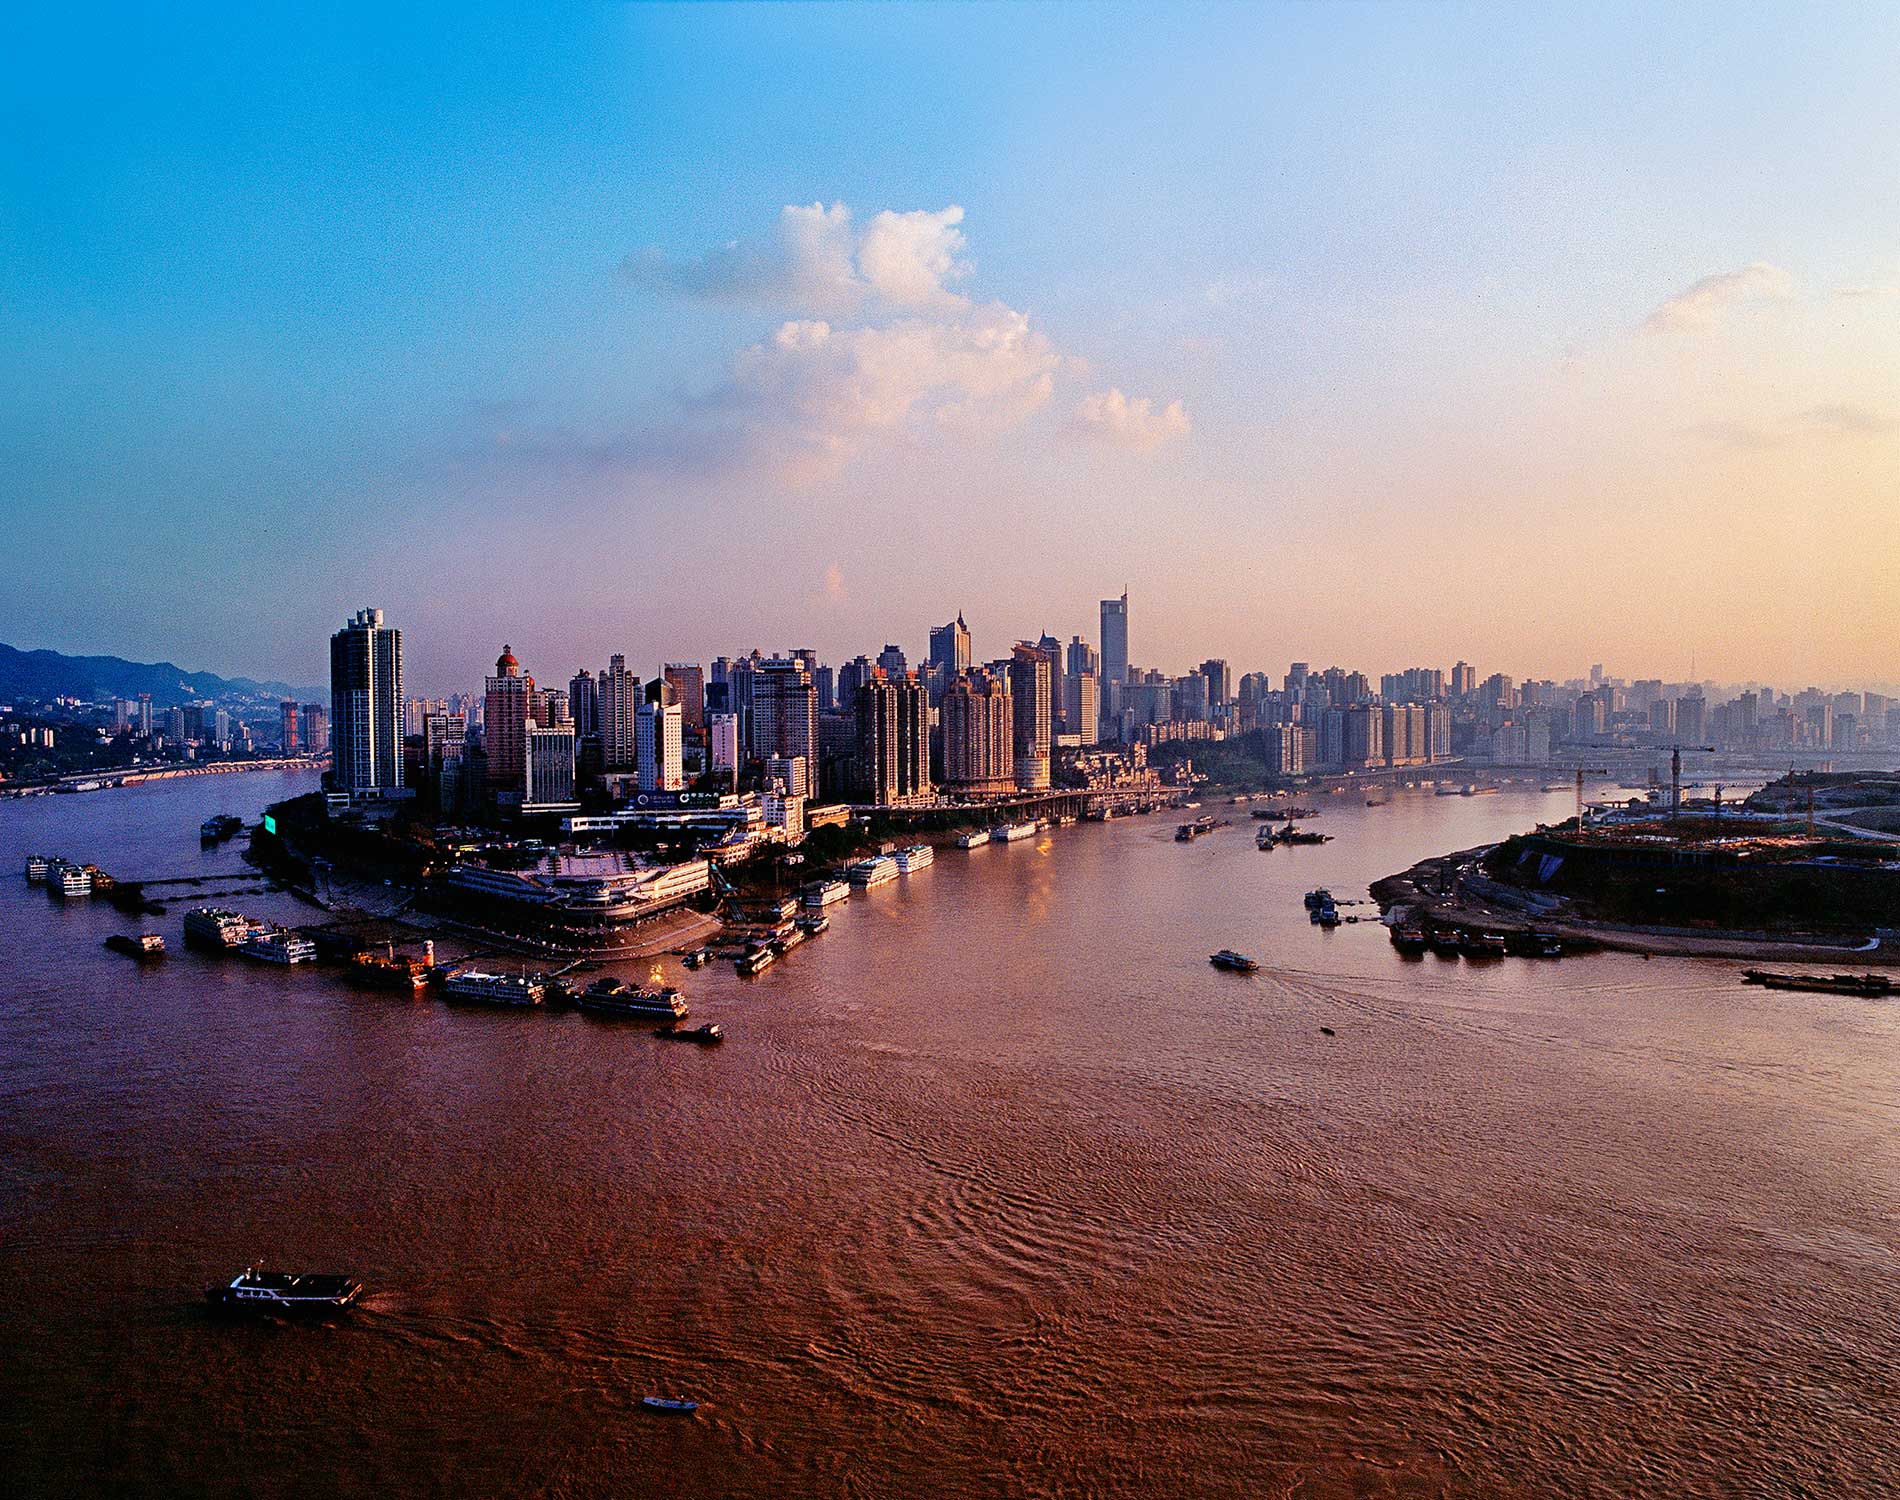 /-/media/images/website/background-images/offices/chongqing/chongqing_city_1900x1500px.ashx?sc_lang=pl-pl